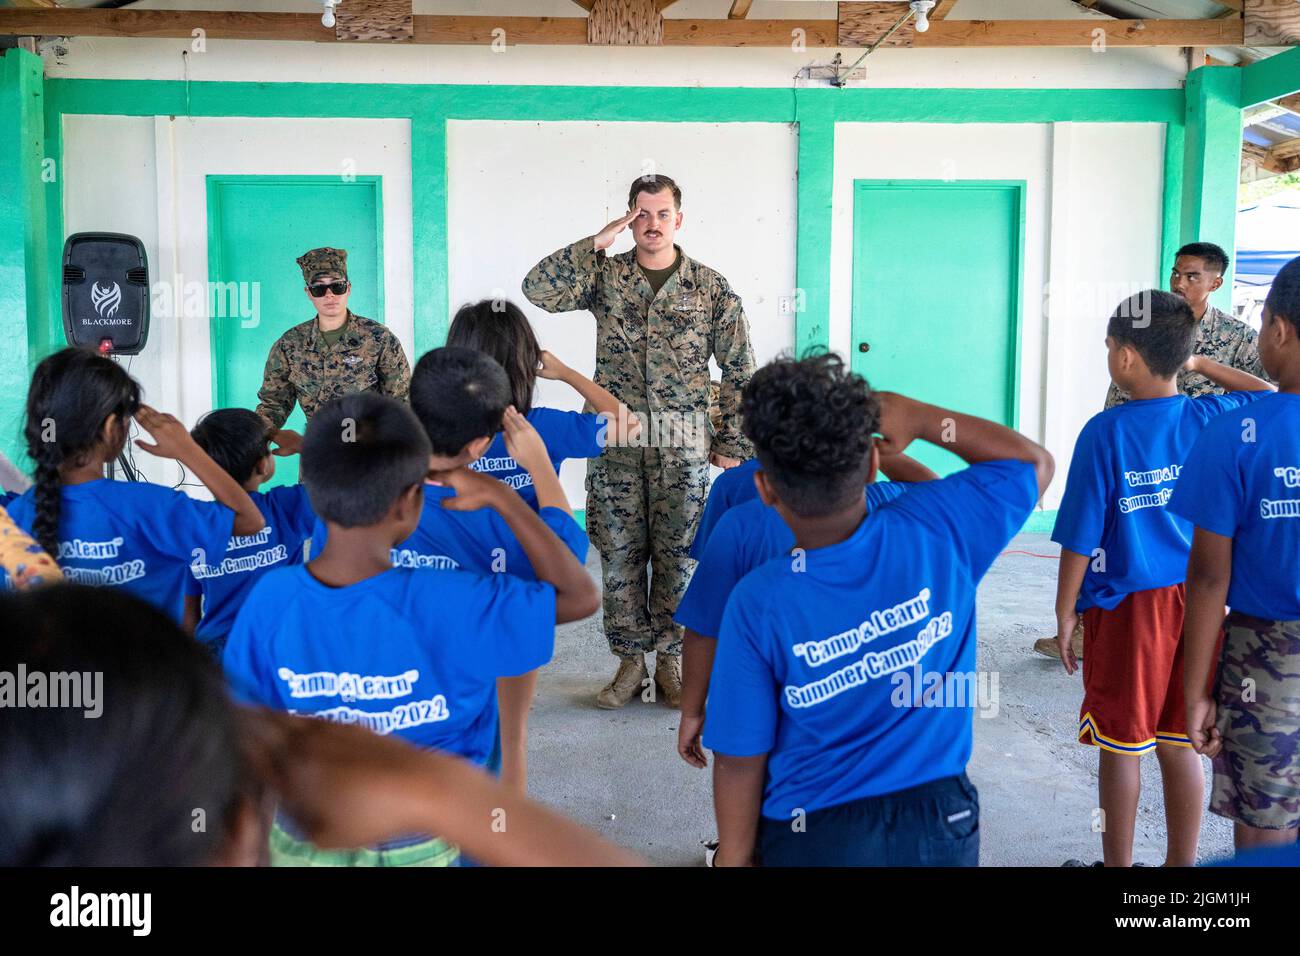 June 20, 2022 - Ngeremlengui, Palau - U.S. Navy Hospital Corpsmen 2nd Class Aaron Johnson with Task Force Koa Moana 22, I Marine Expeditionary Force, instructs the children participating in the Division of Juvenile Justices Omesuub Ngosisechakl Emesmechokl Law Enforcement Explorers Program in Ngeremlengui, Republic of Palau, June 20, 2022. Omesuub Ngosisechakl Emesmechokl in the native language translates to learning, teaching and discipline, traits that are exemplified by the Marines and Sailors strengthening U.S. partnerships through subject matter expert exchanges. Named Koa Moana after a H Stock Photo